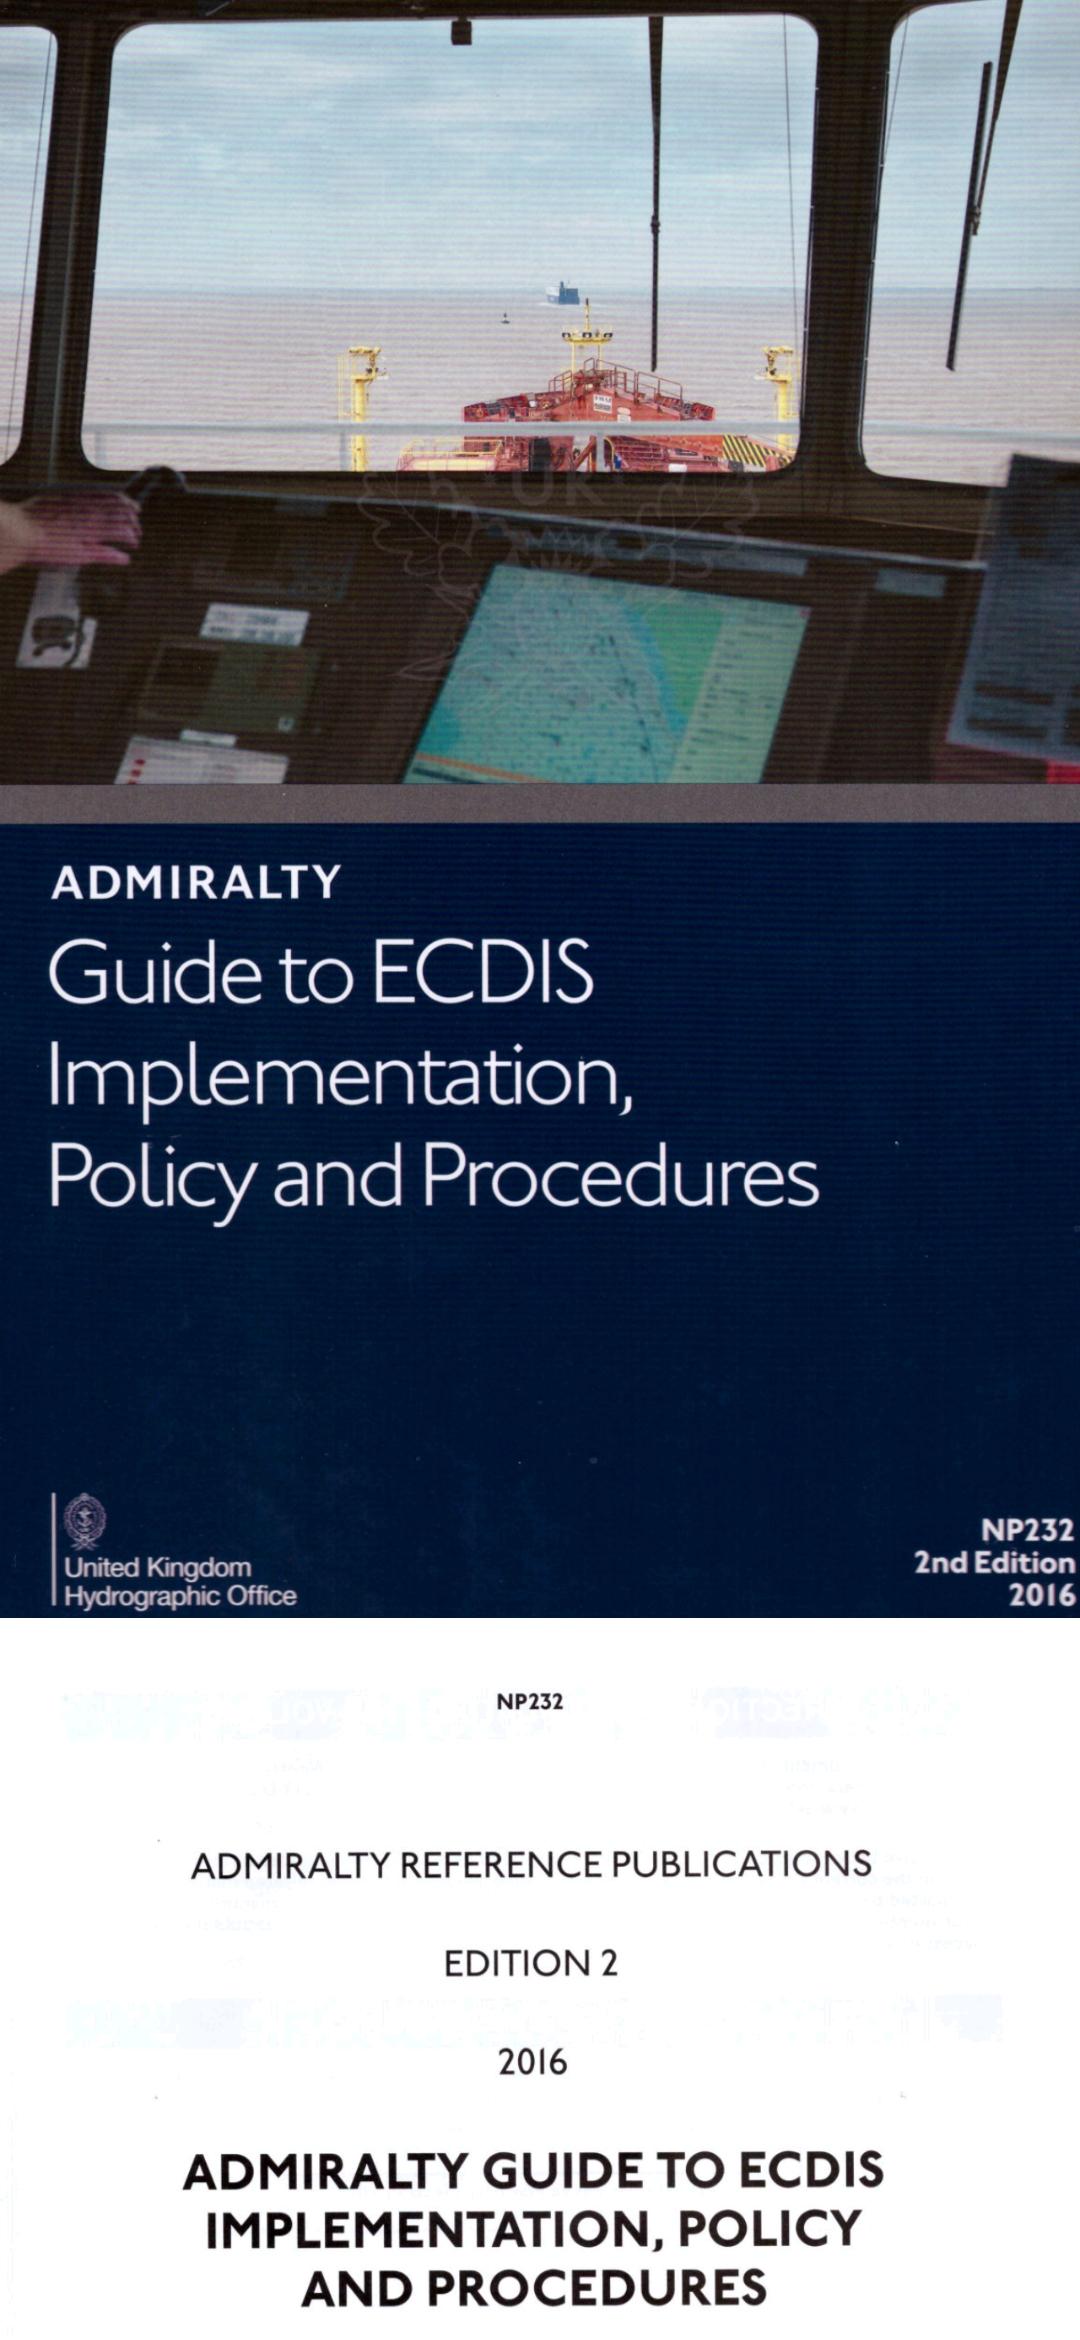 Guide to ECDIS Implementation, Policy & Procedure 2 Screenshot 1